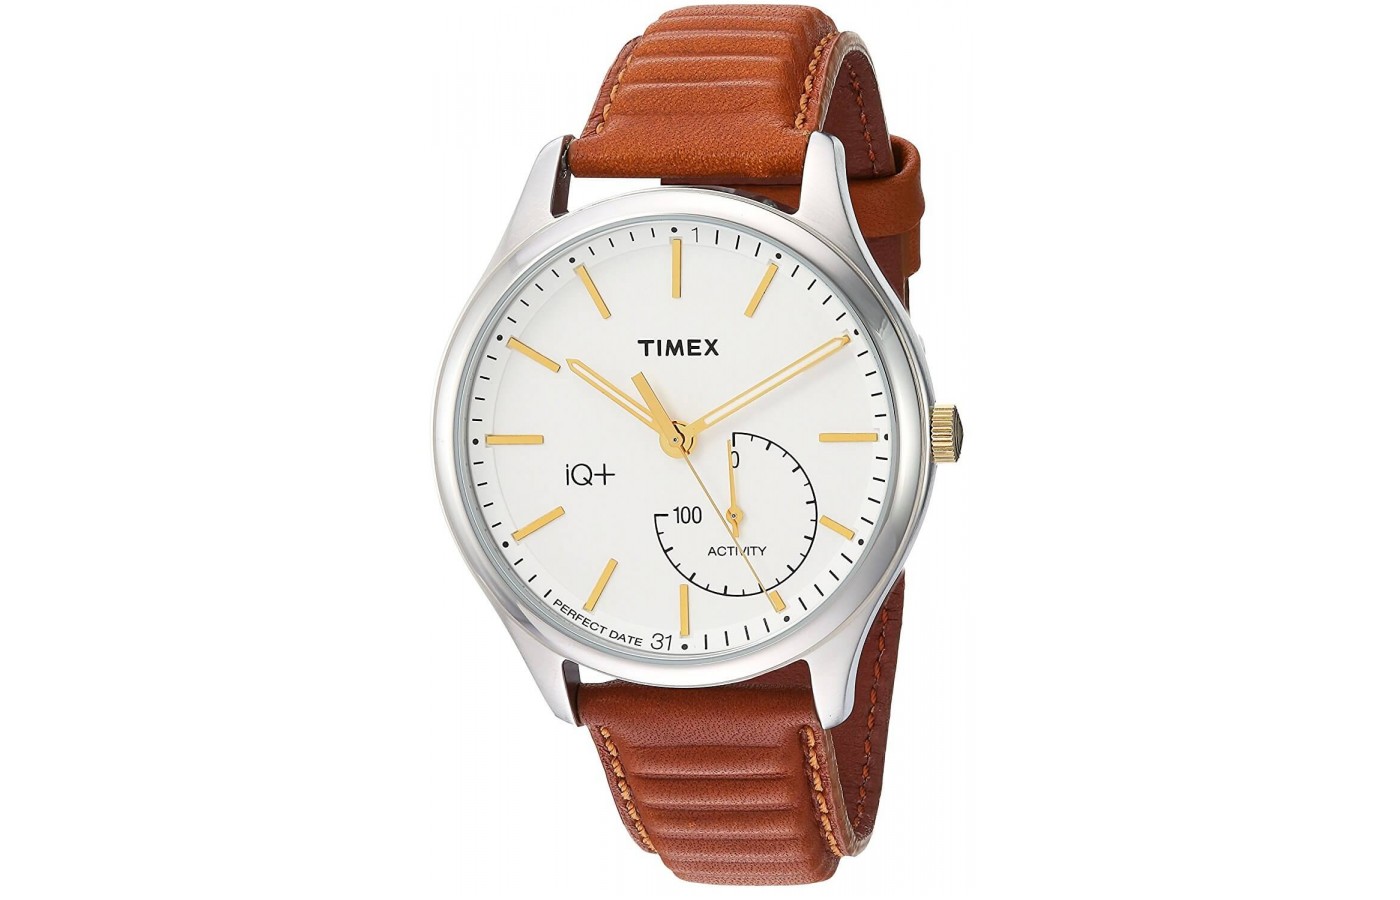 The Timex IQ + Move provides daily fitness tracking including sleep monitoring